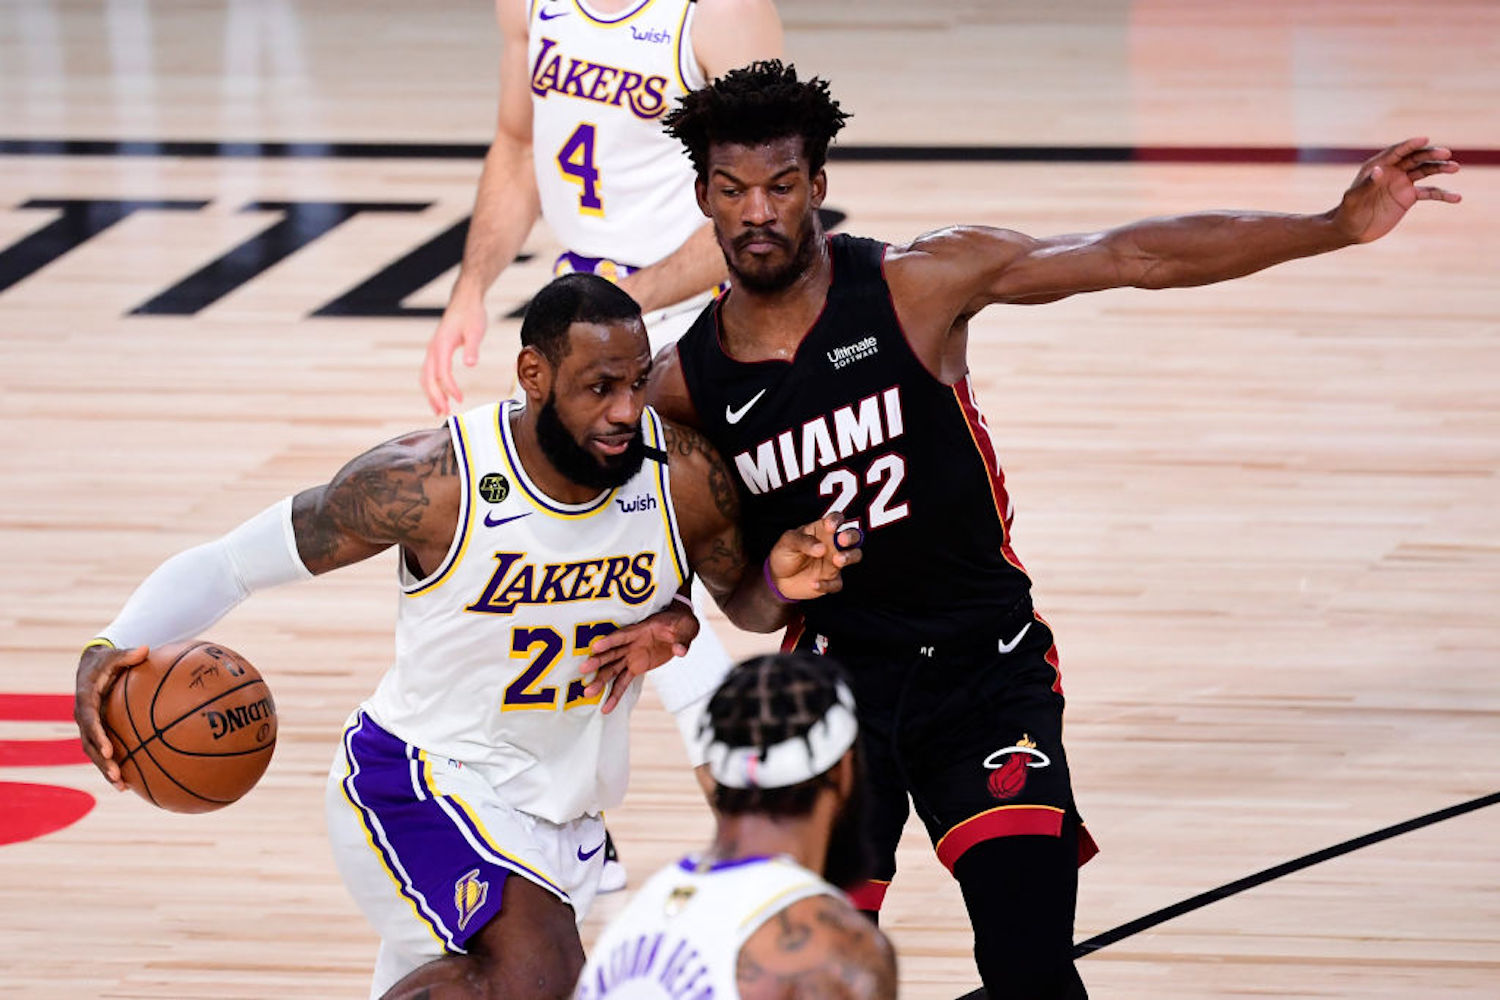 Jimmy Butler led the Miami Heat to an improbable Game 3 win Sunday night, and he wasn't afraid to talk trash to LeBron James afterward.